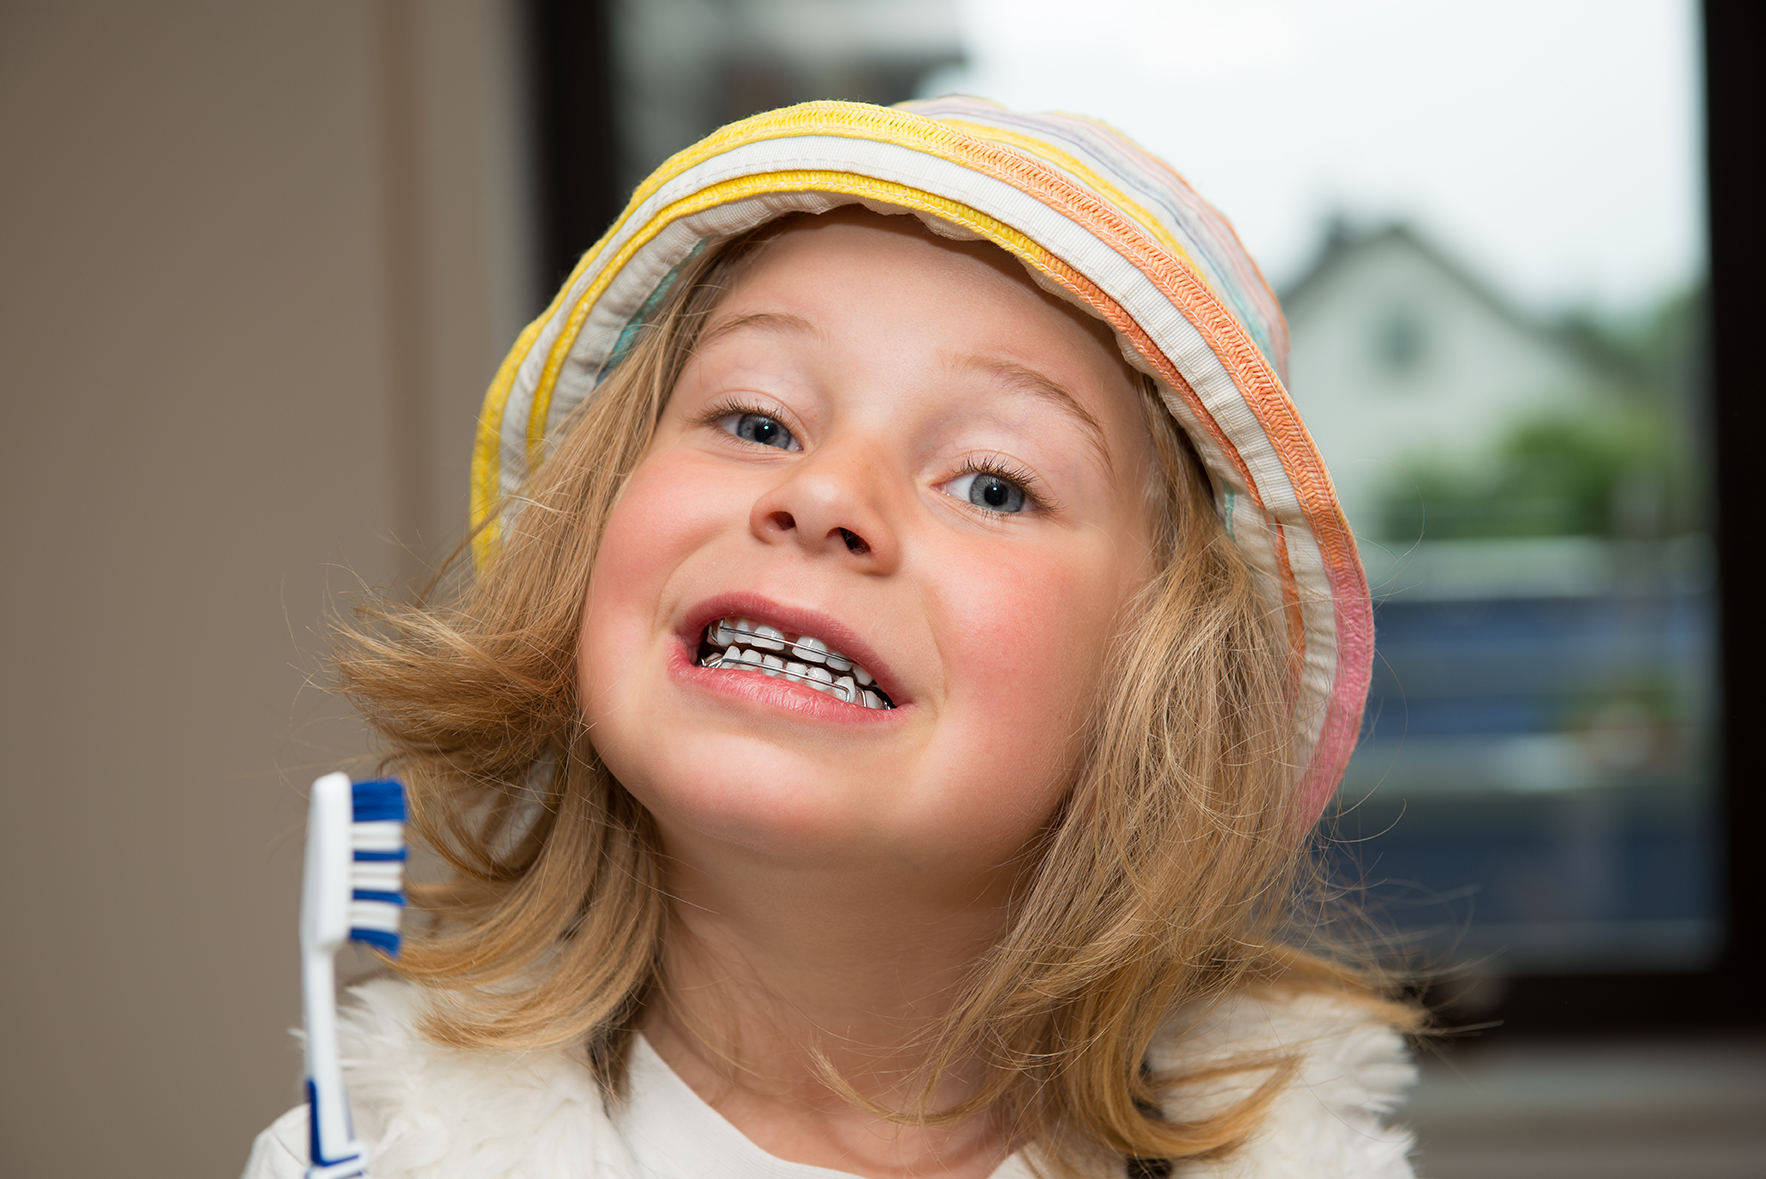 little girl with braces retainer and toothbrush